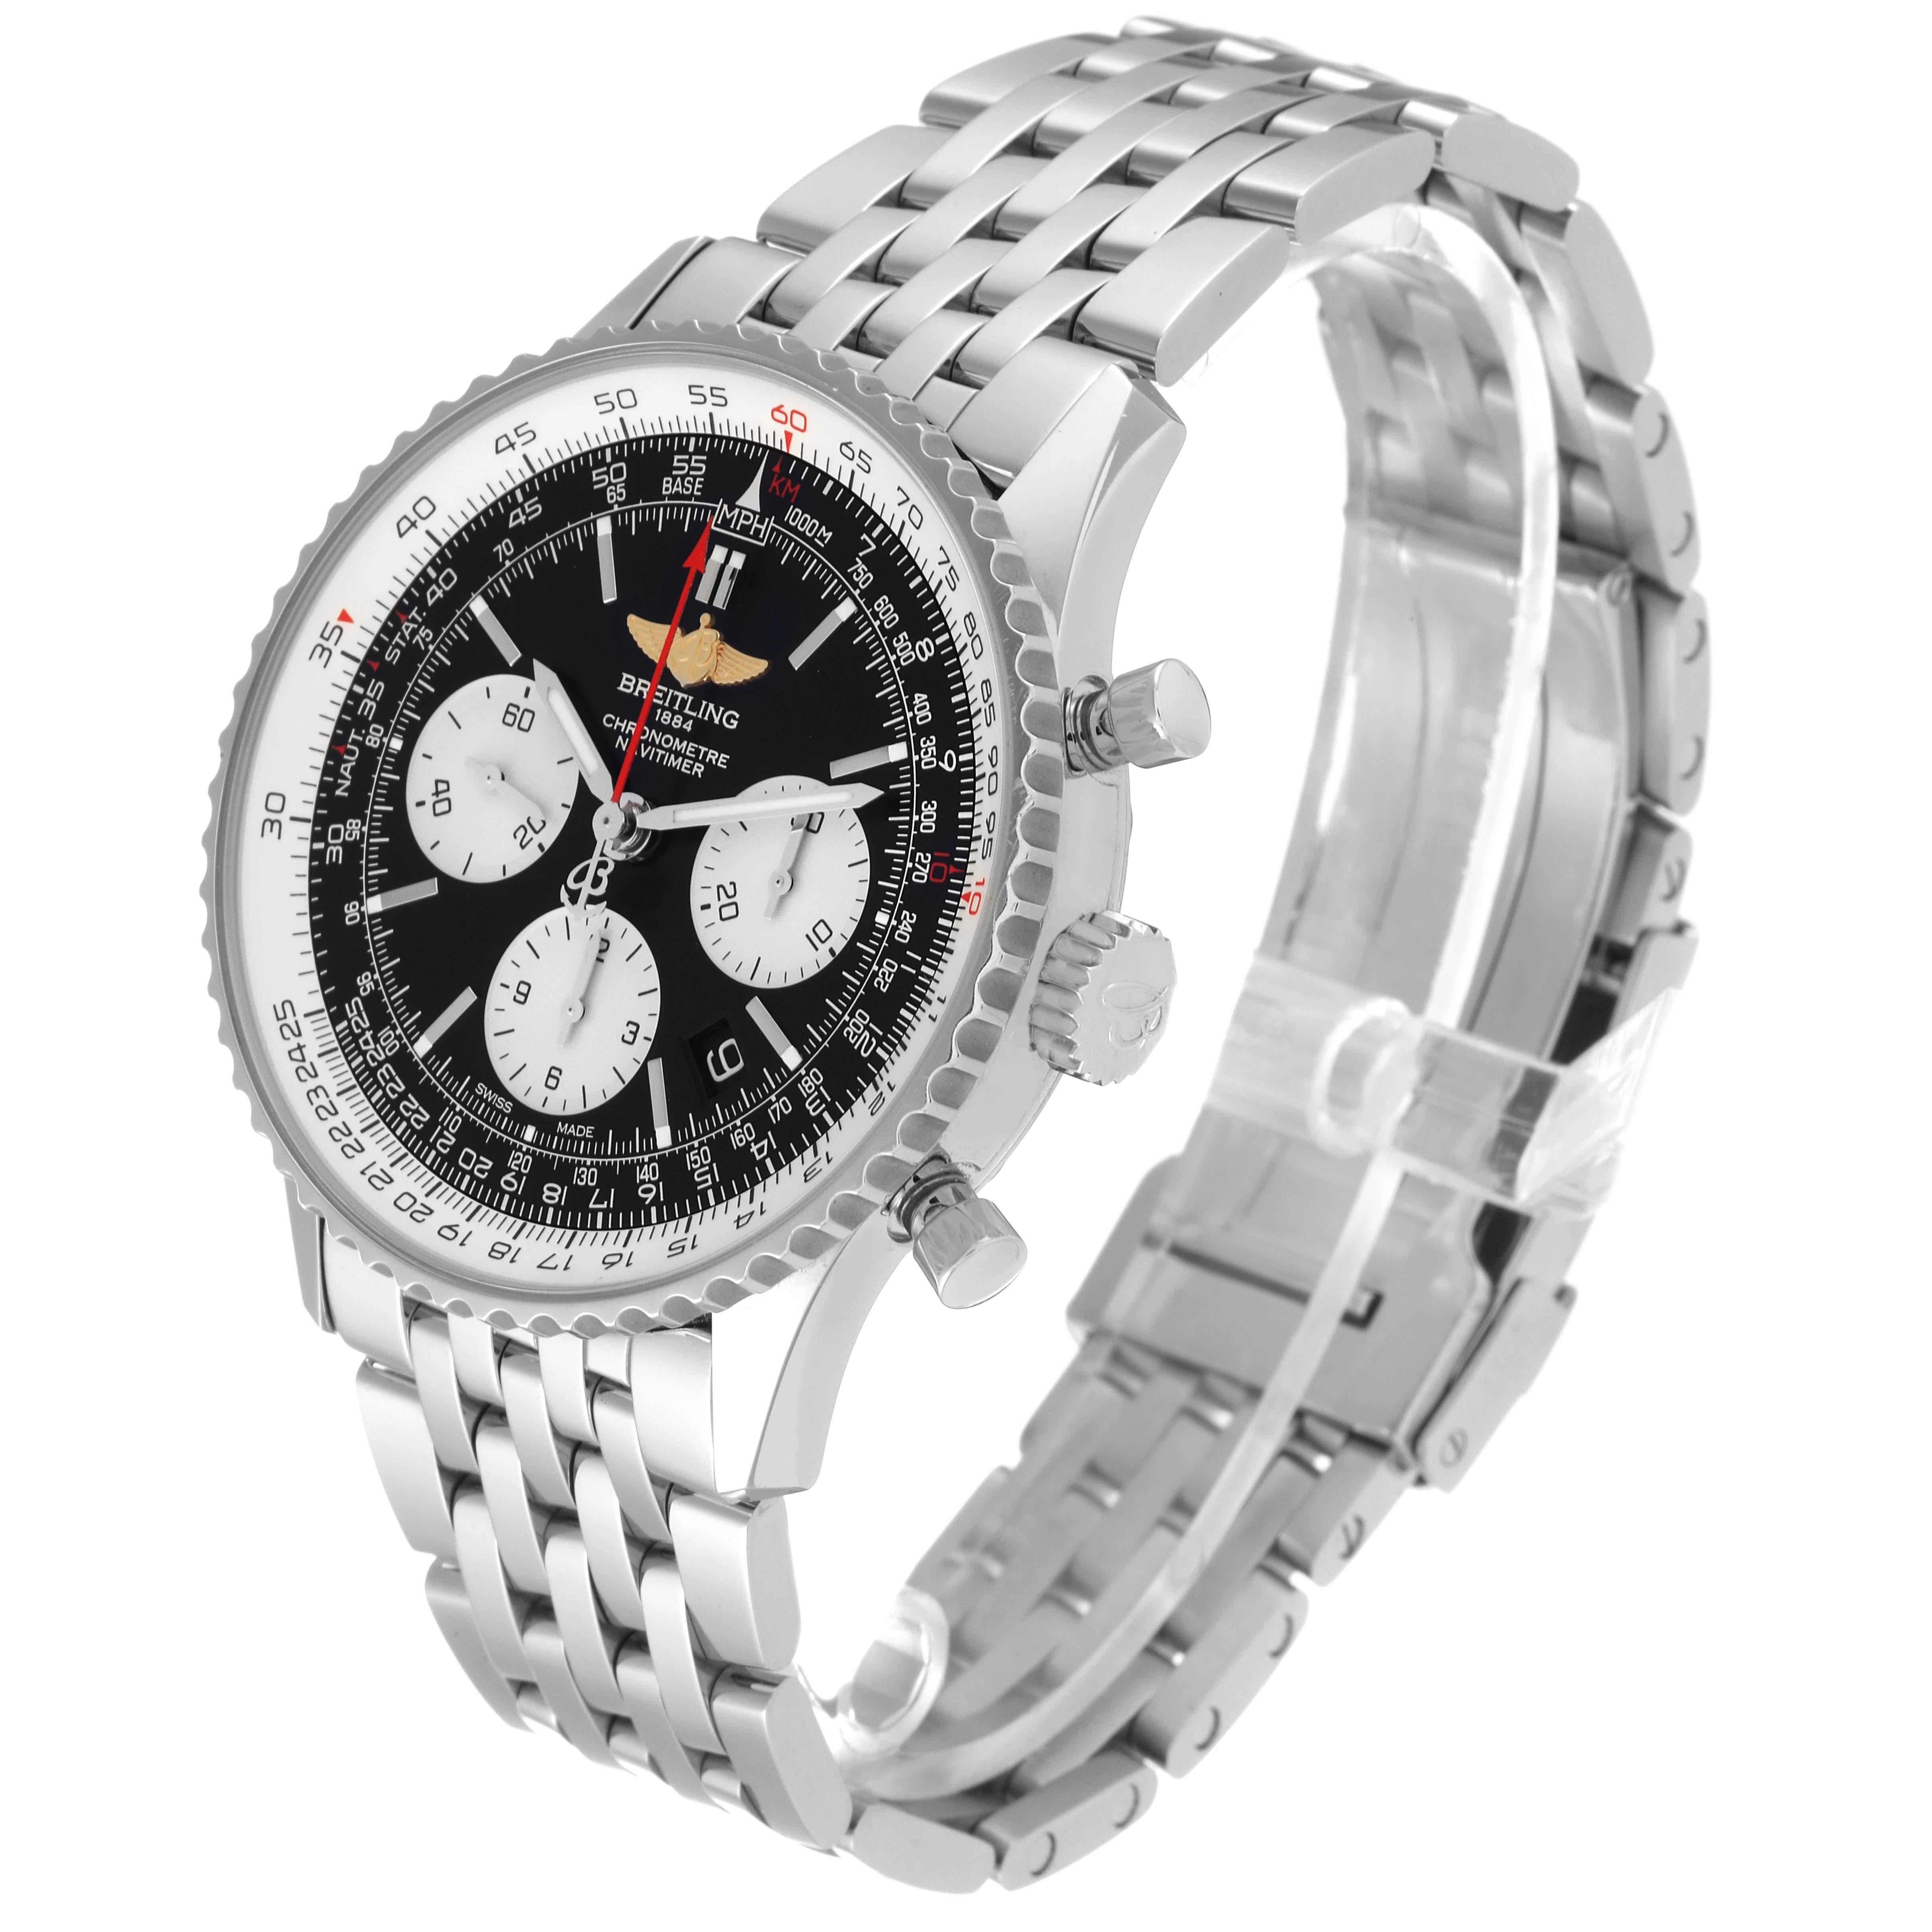 Breitling Navitimer 01 Black Dial Steel Mens Watch AB0120 Box Card In Excellent Condition For Sale In Atlanta, GA